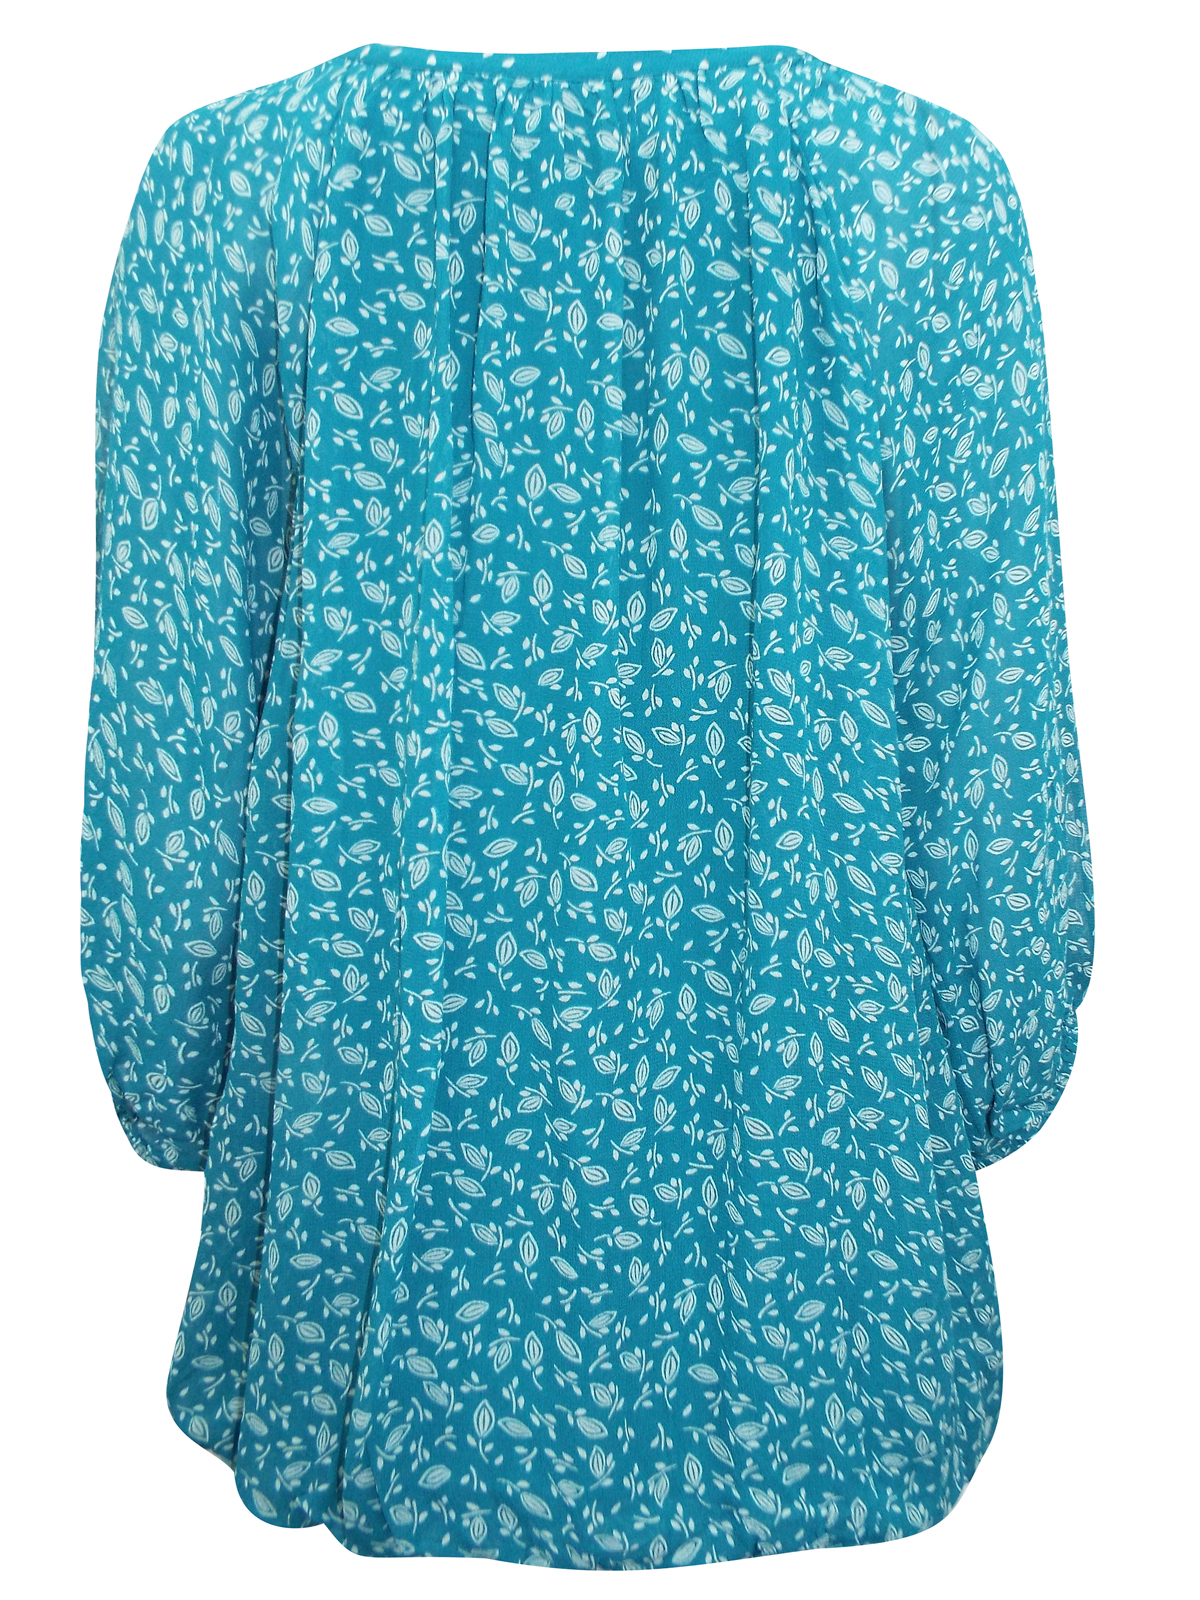 Marks and Spencer - - P3rUna GREEN Leaf Print Bubble Hem Top - Size 12 ...